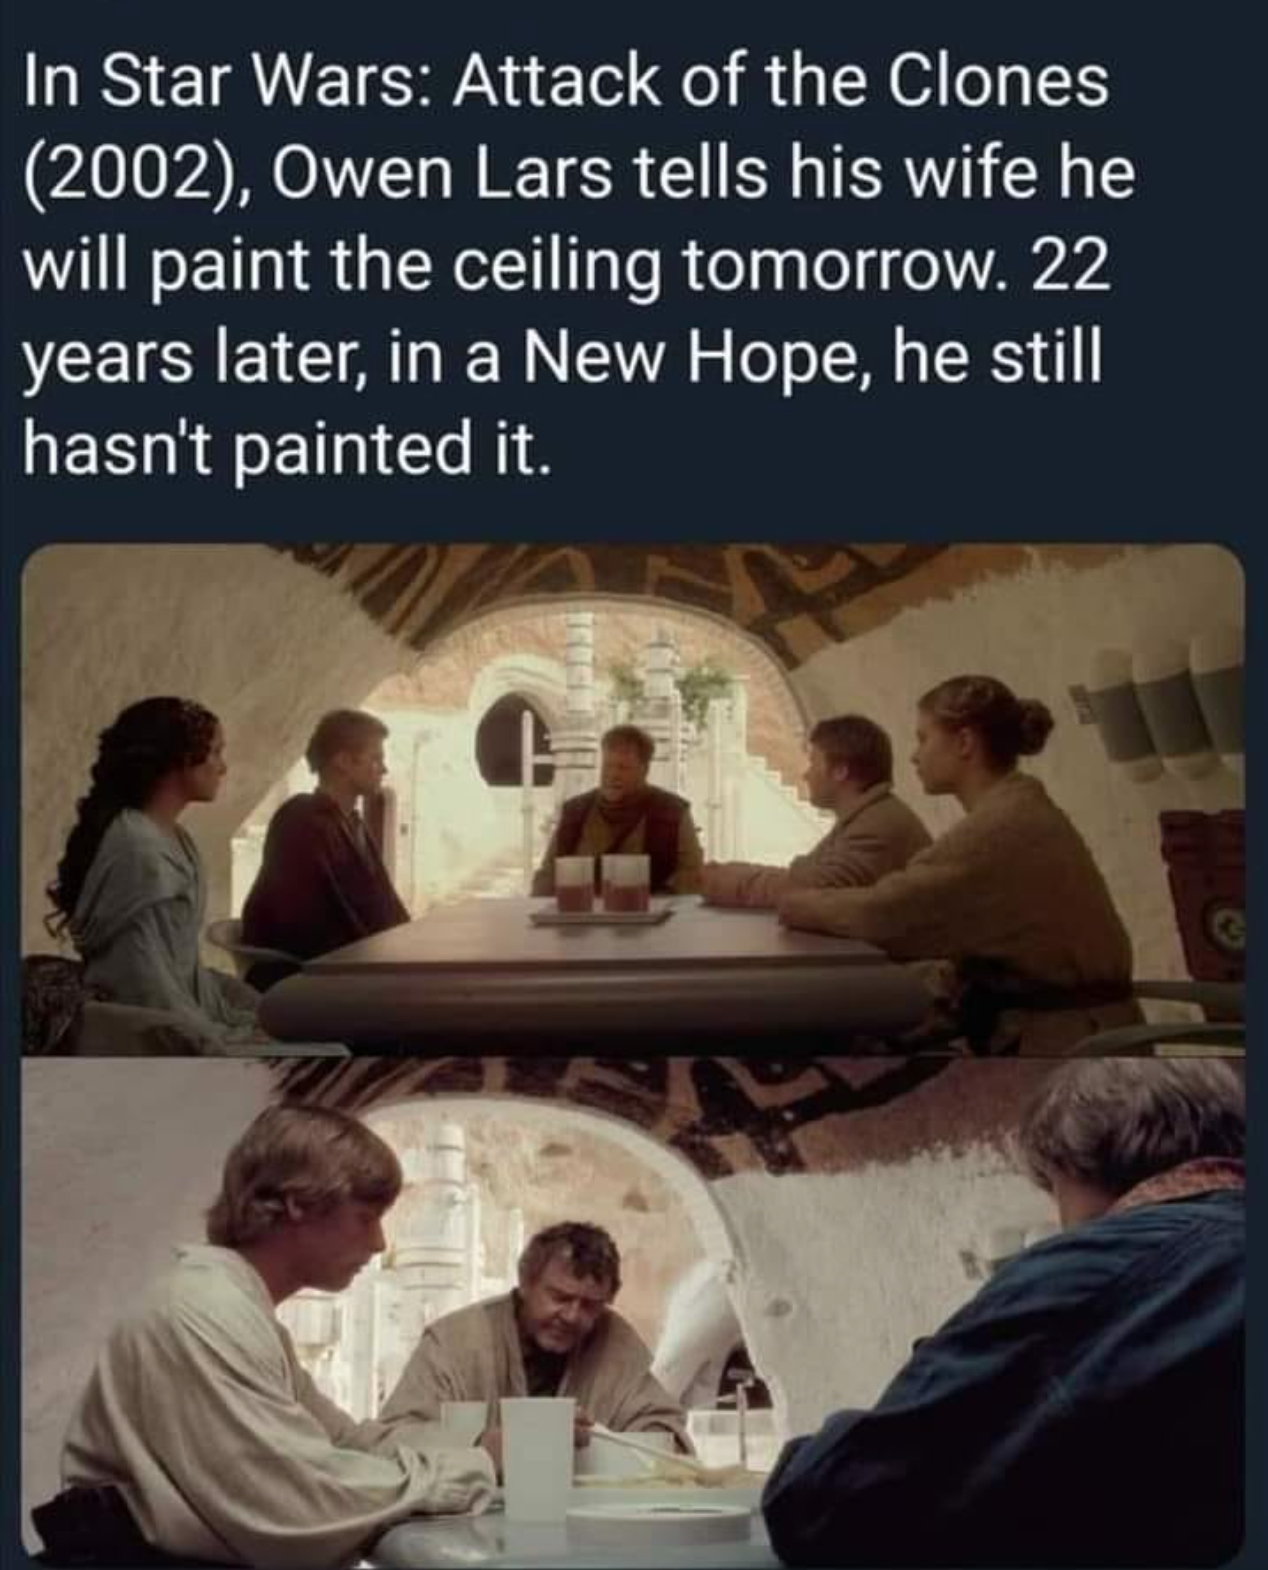 owen lars paint the ceiling - In Star Wars Attack of the Clones 2002, Owen Lars tells his wife he will paint the ceiling tomorrow. 22 years later, in a New Hope, he still hasn't painted it.